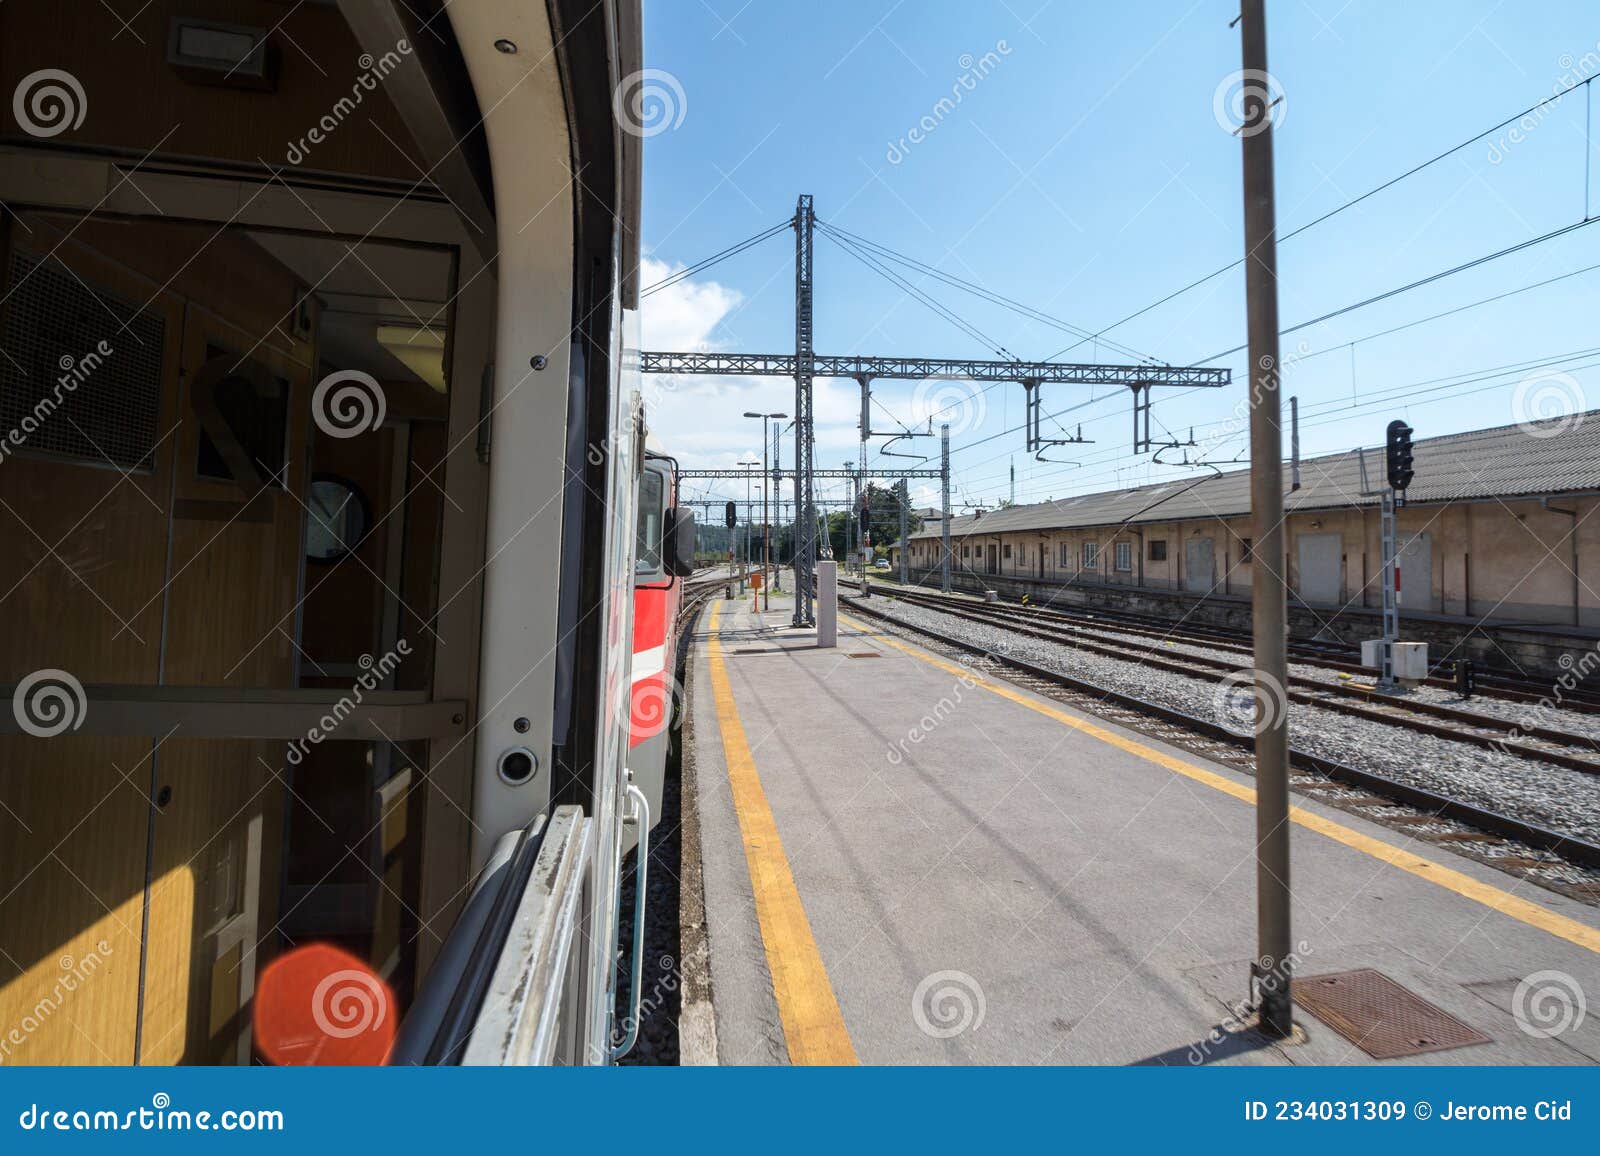 train station platform of pivka, slovenia, seen from the window of a passenger train travelling accross europe during sunny summer